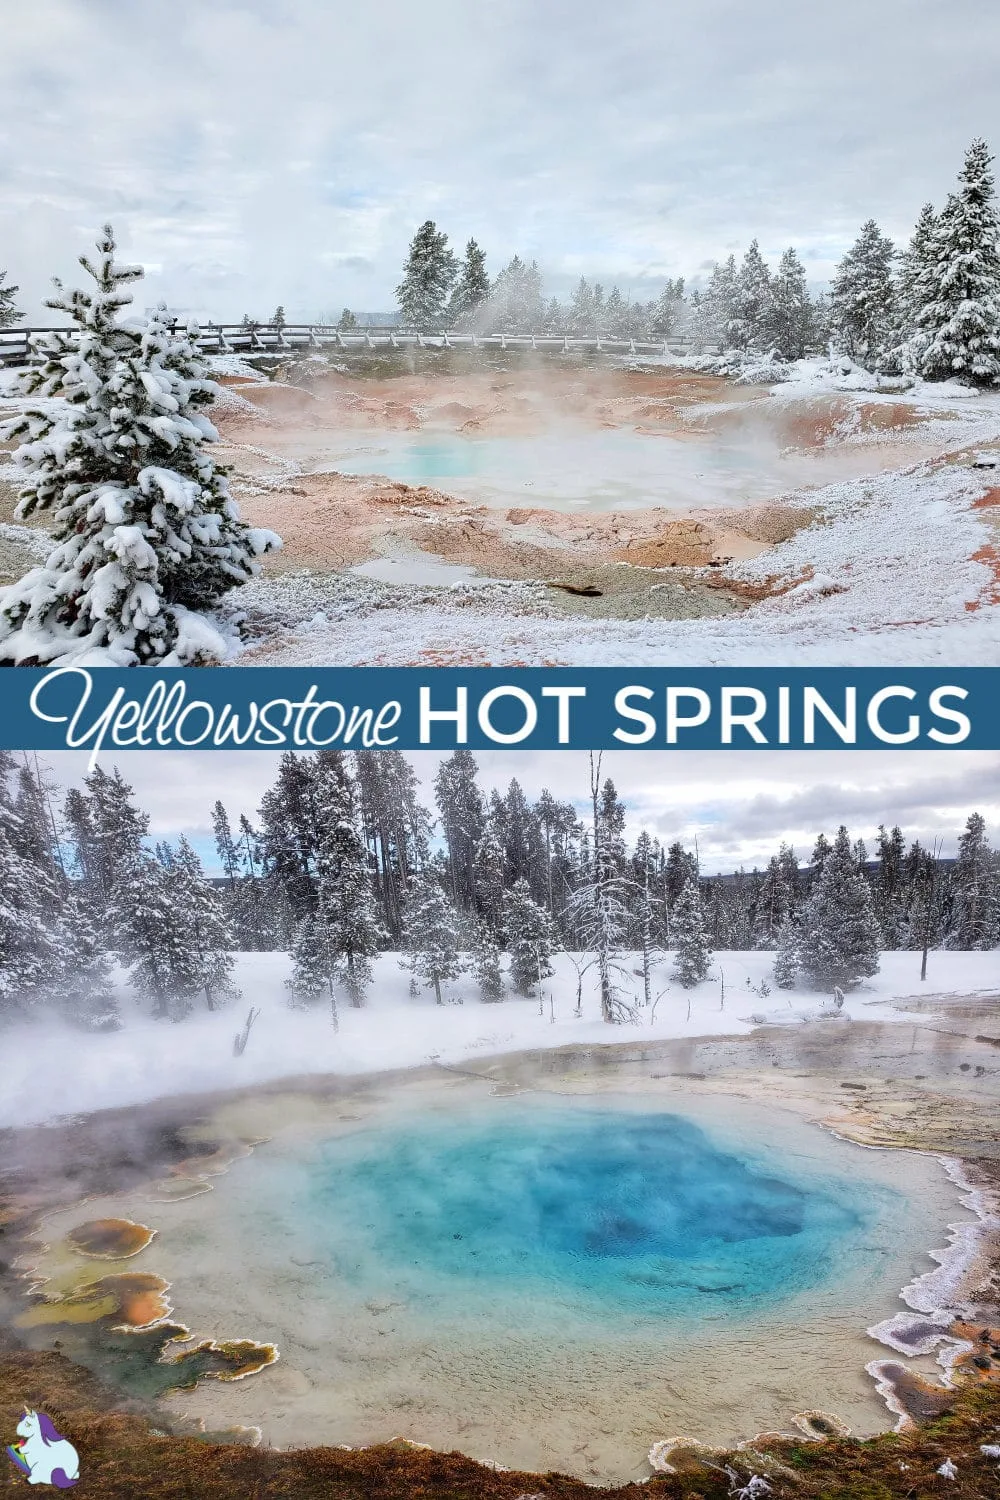 Blue hot springs in Yellowstone National Park.